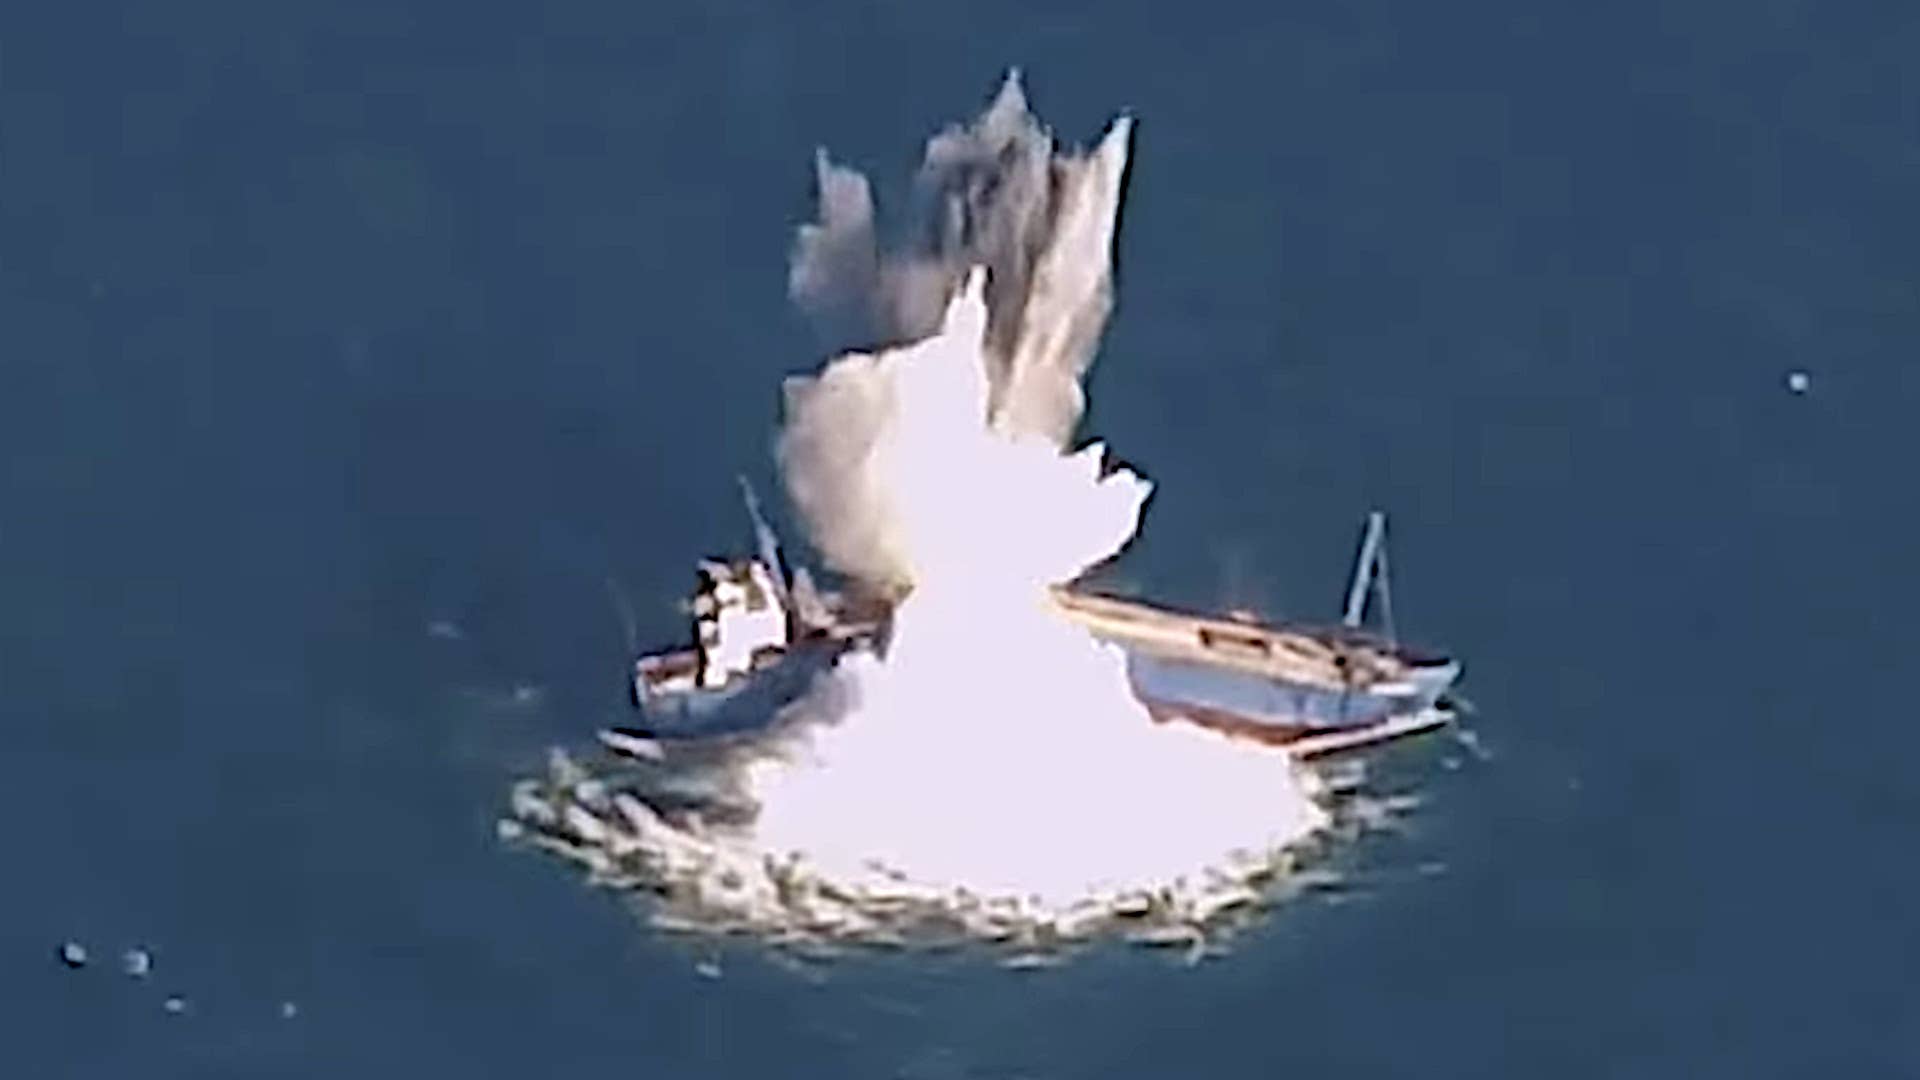 A frame from a video the US Air Force released showing a modified JDAM precision-guided bomb striking a target ship in the Gulf of Mexico during a test in April 2022.